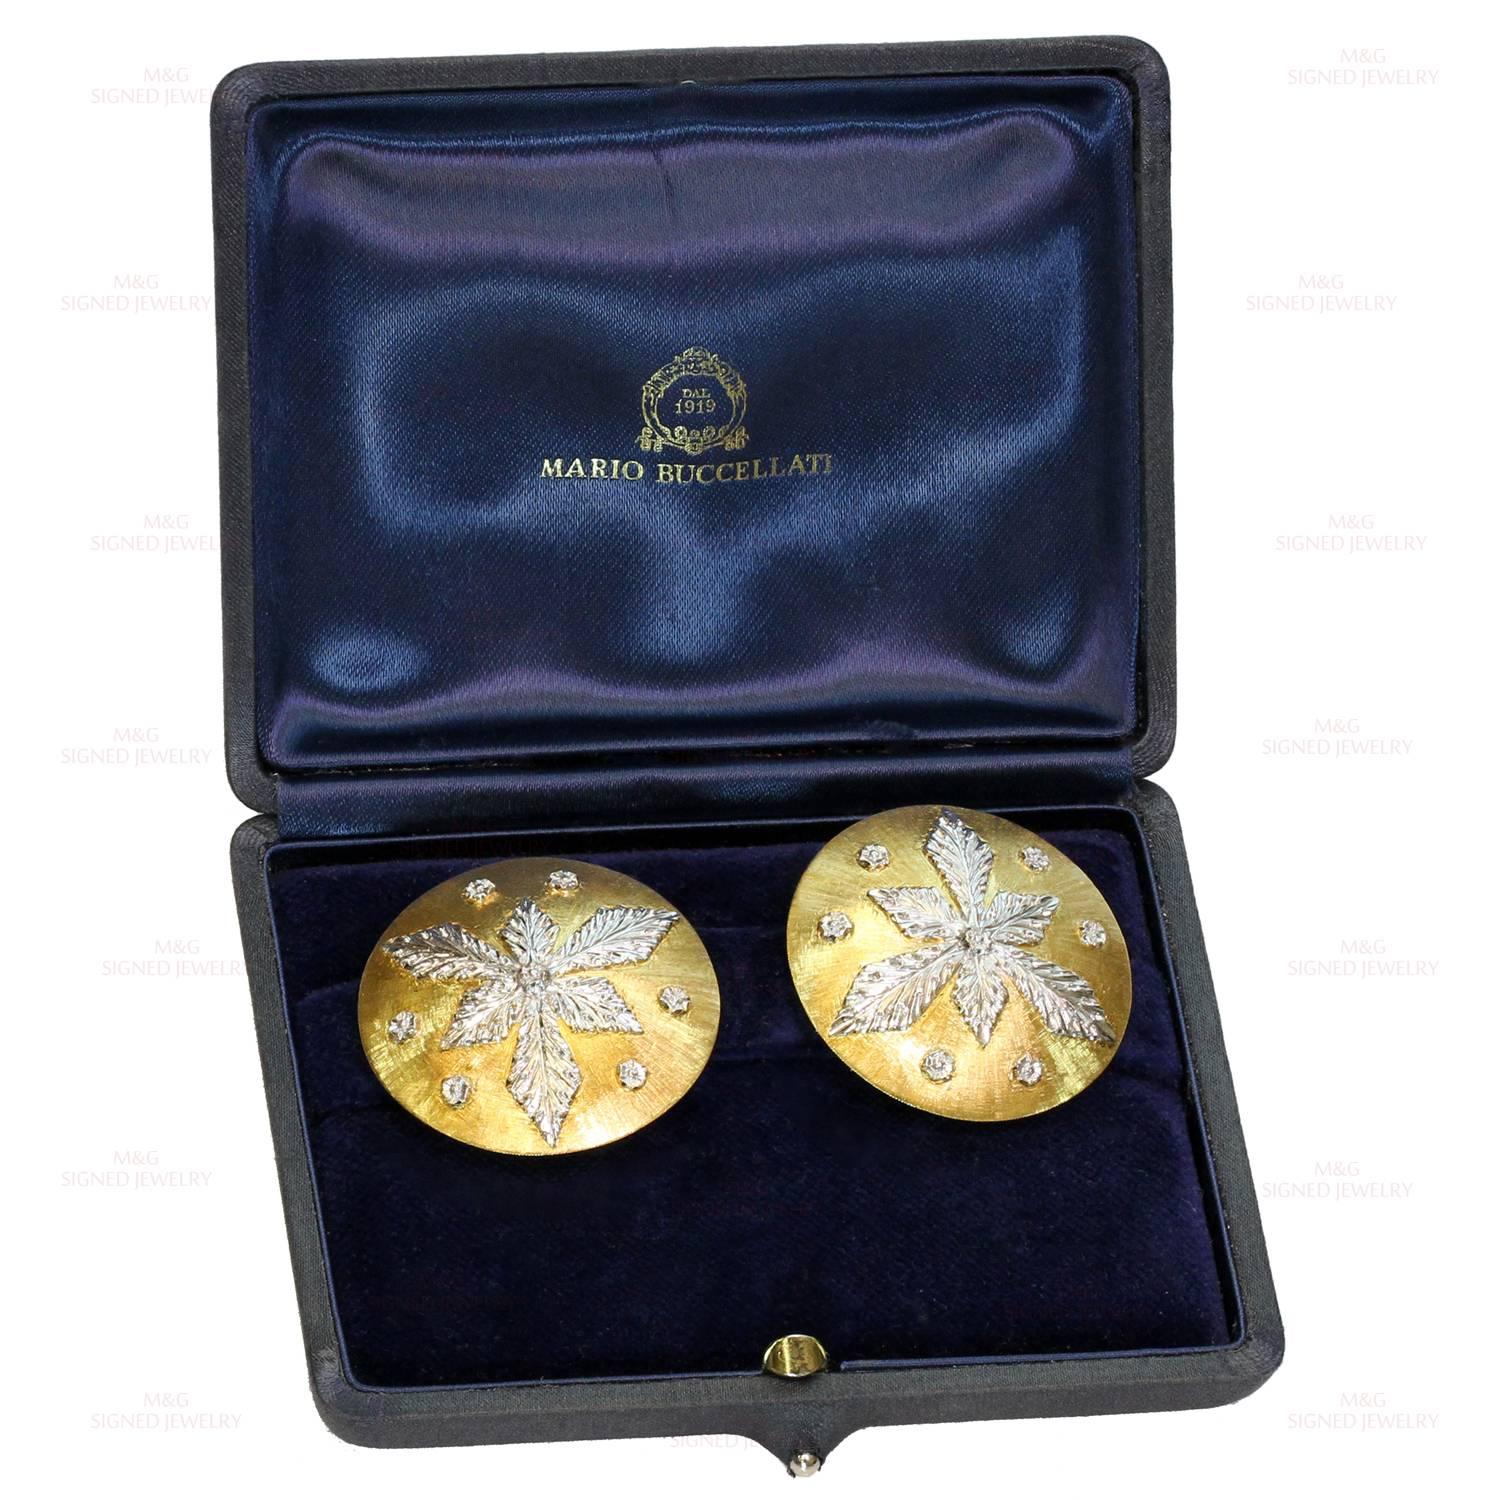 These stunning Mario Buccellati round button earrings are crafted in 18k yellow gold and beautifully contrasted with 18k white gold accents. Completed with clip-on omega backs. Posts can be added upon request for pierced ears. Made in Italy.